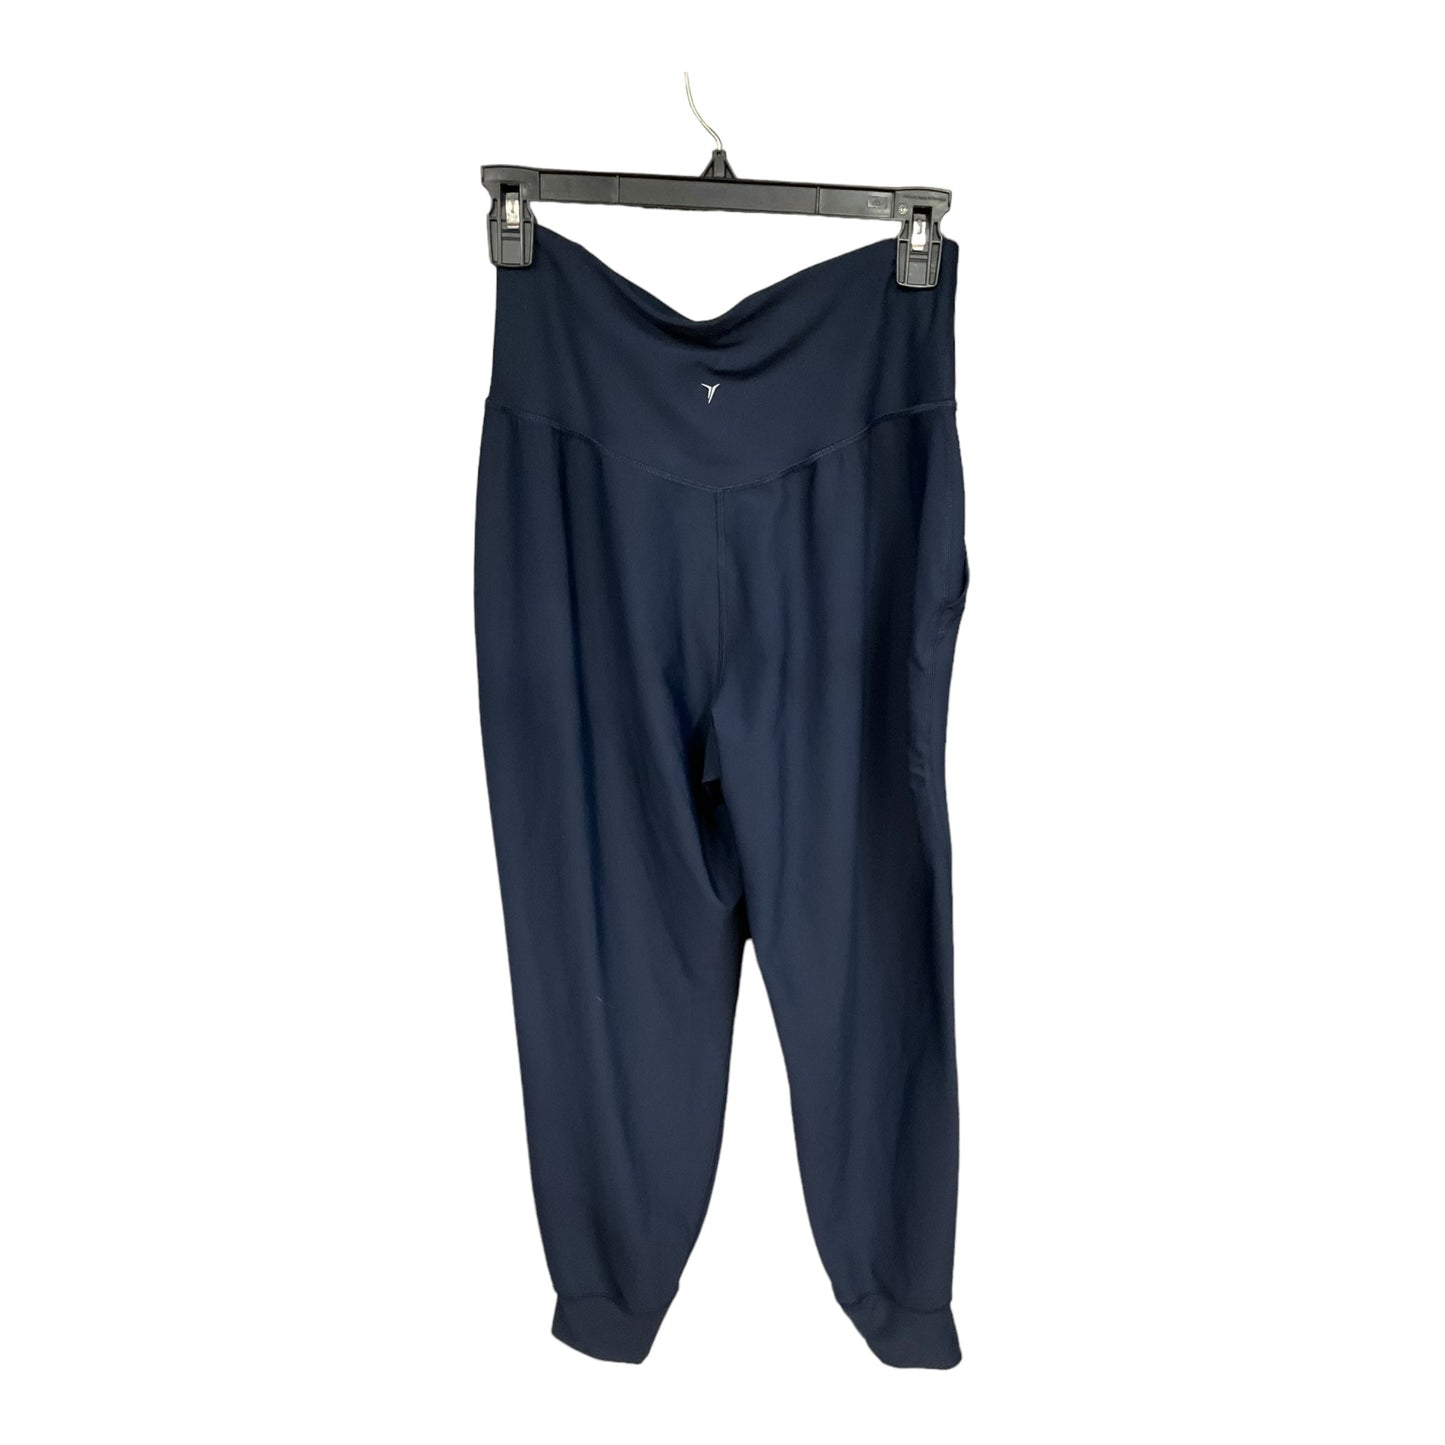 Blue Athletic Pants Old Navy, Size M